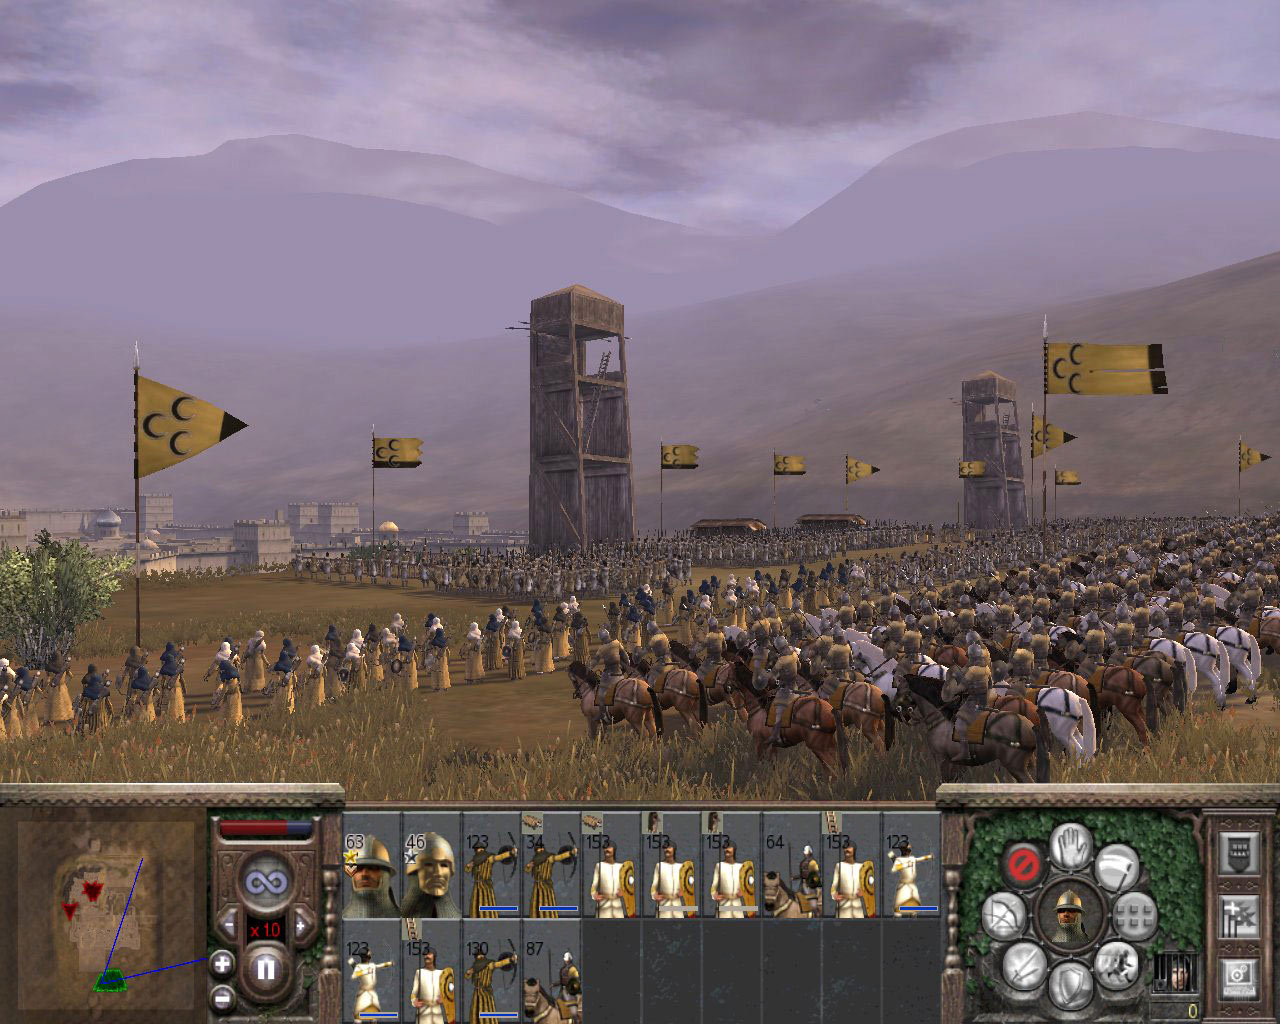 medieval 2 total war game of thrones mods